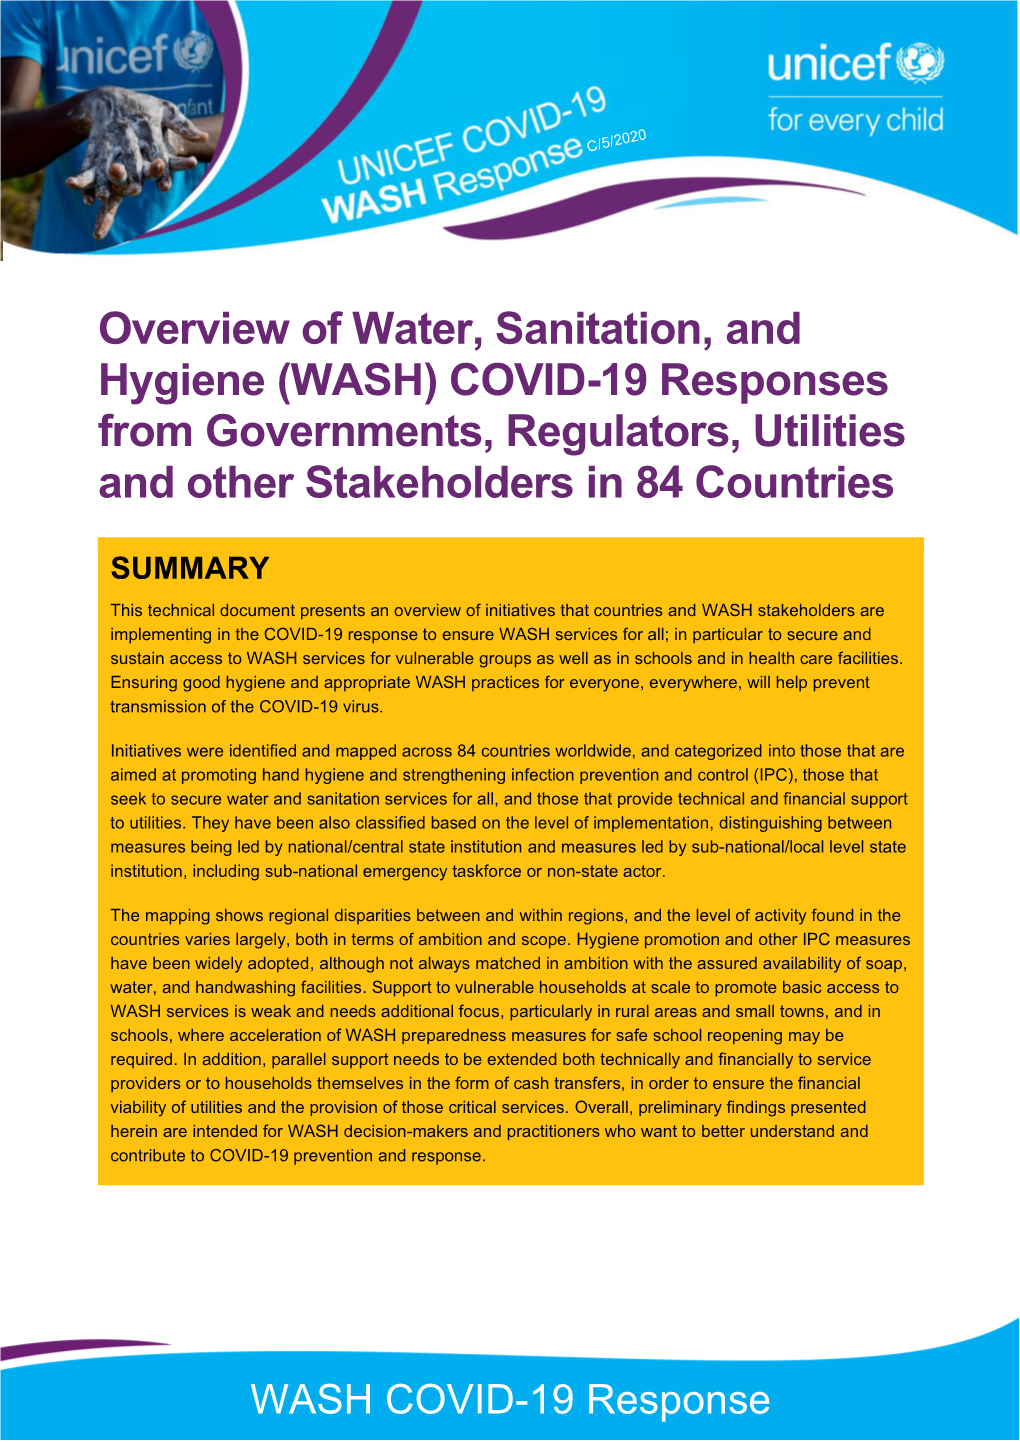 (WASH) COVID-19 Responses from Governments, Regulators, Utilities and Other Stakeholders in 84 Countries